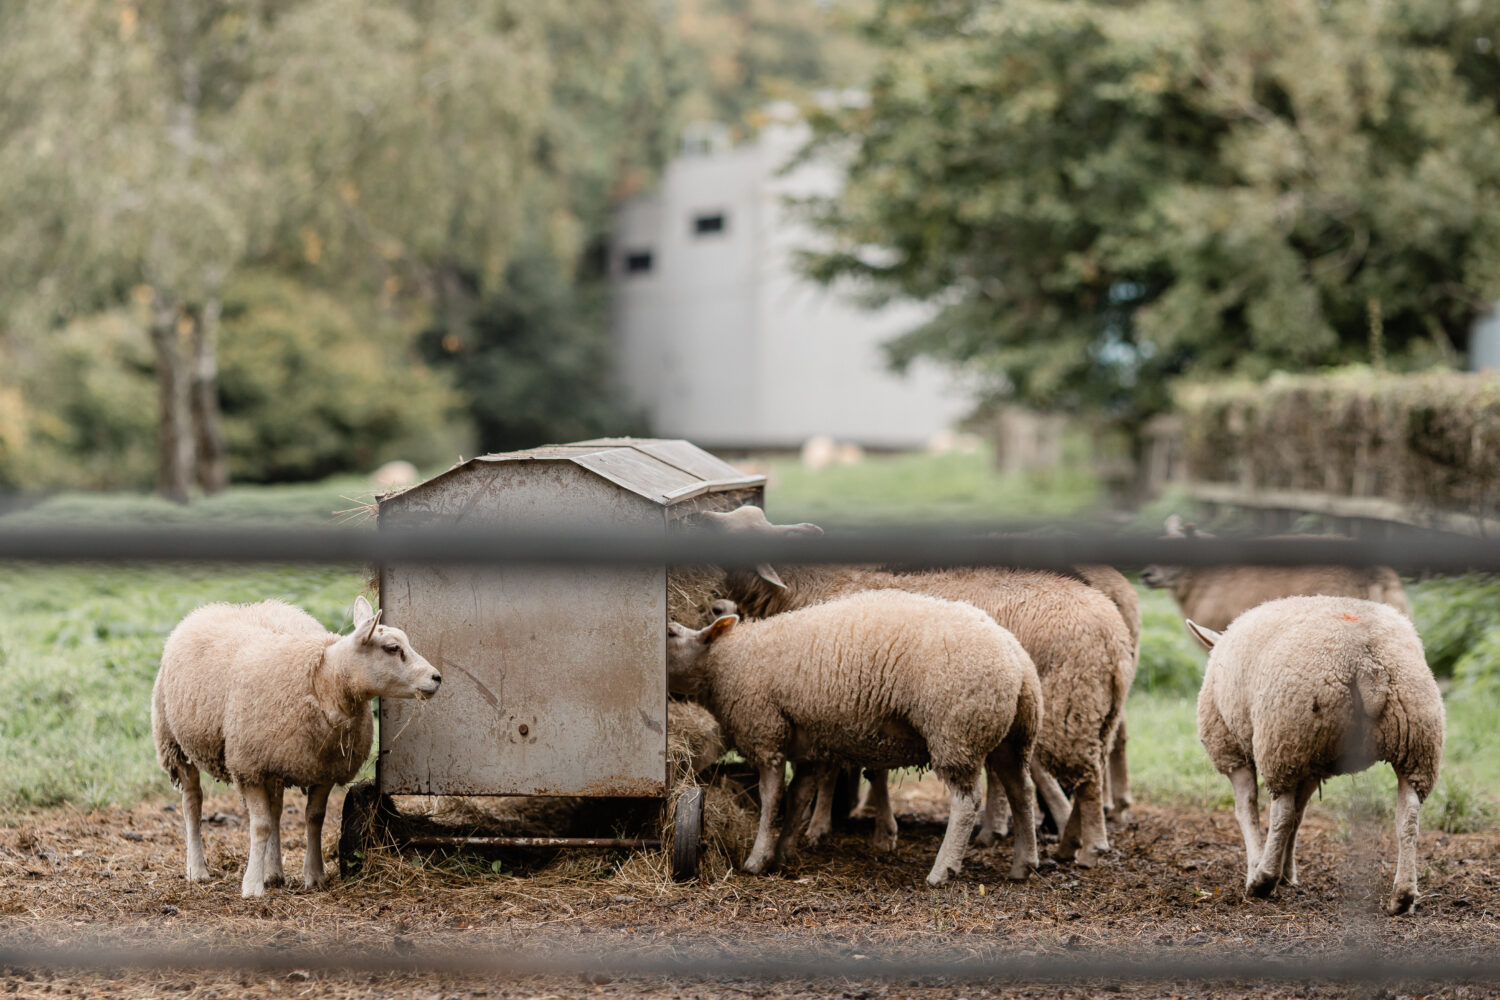 Sheep in a field eating food from a trough